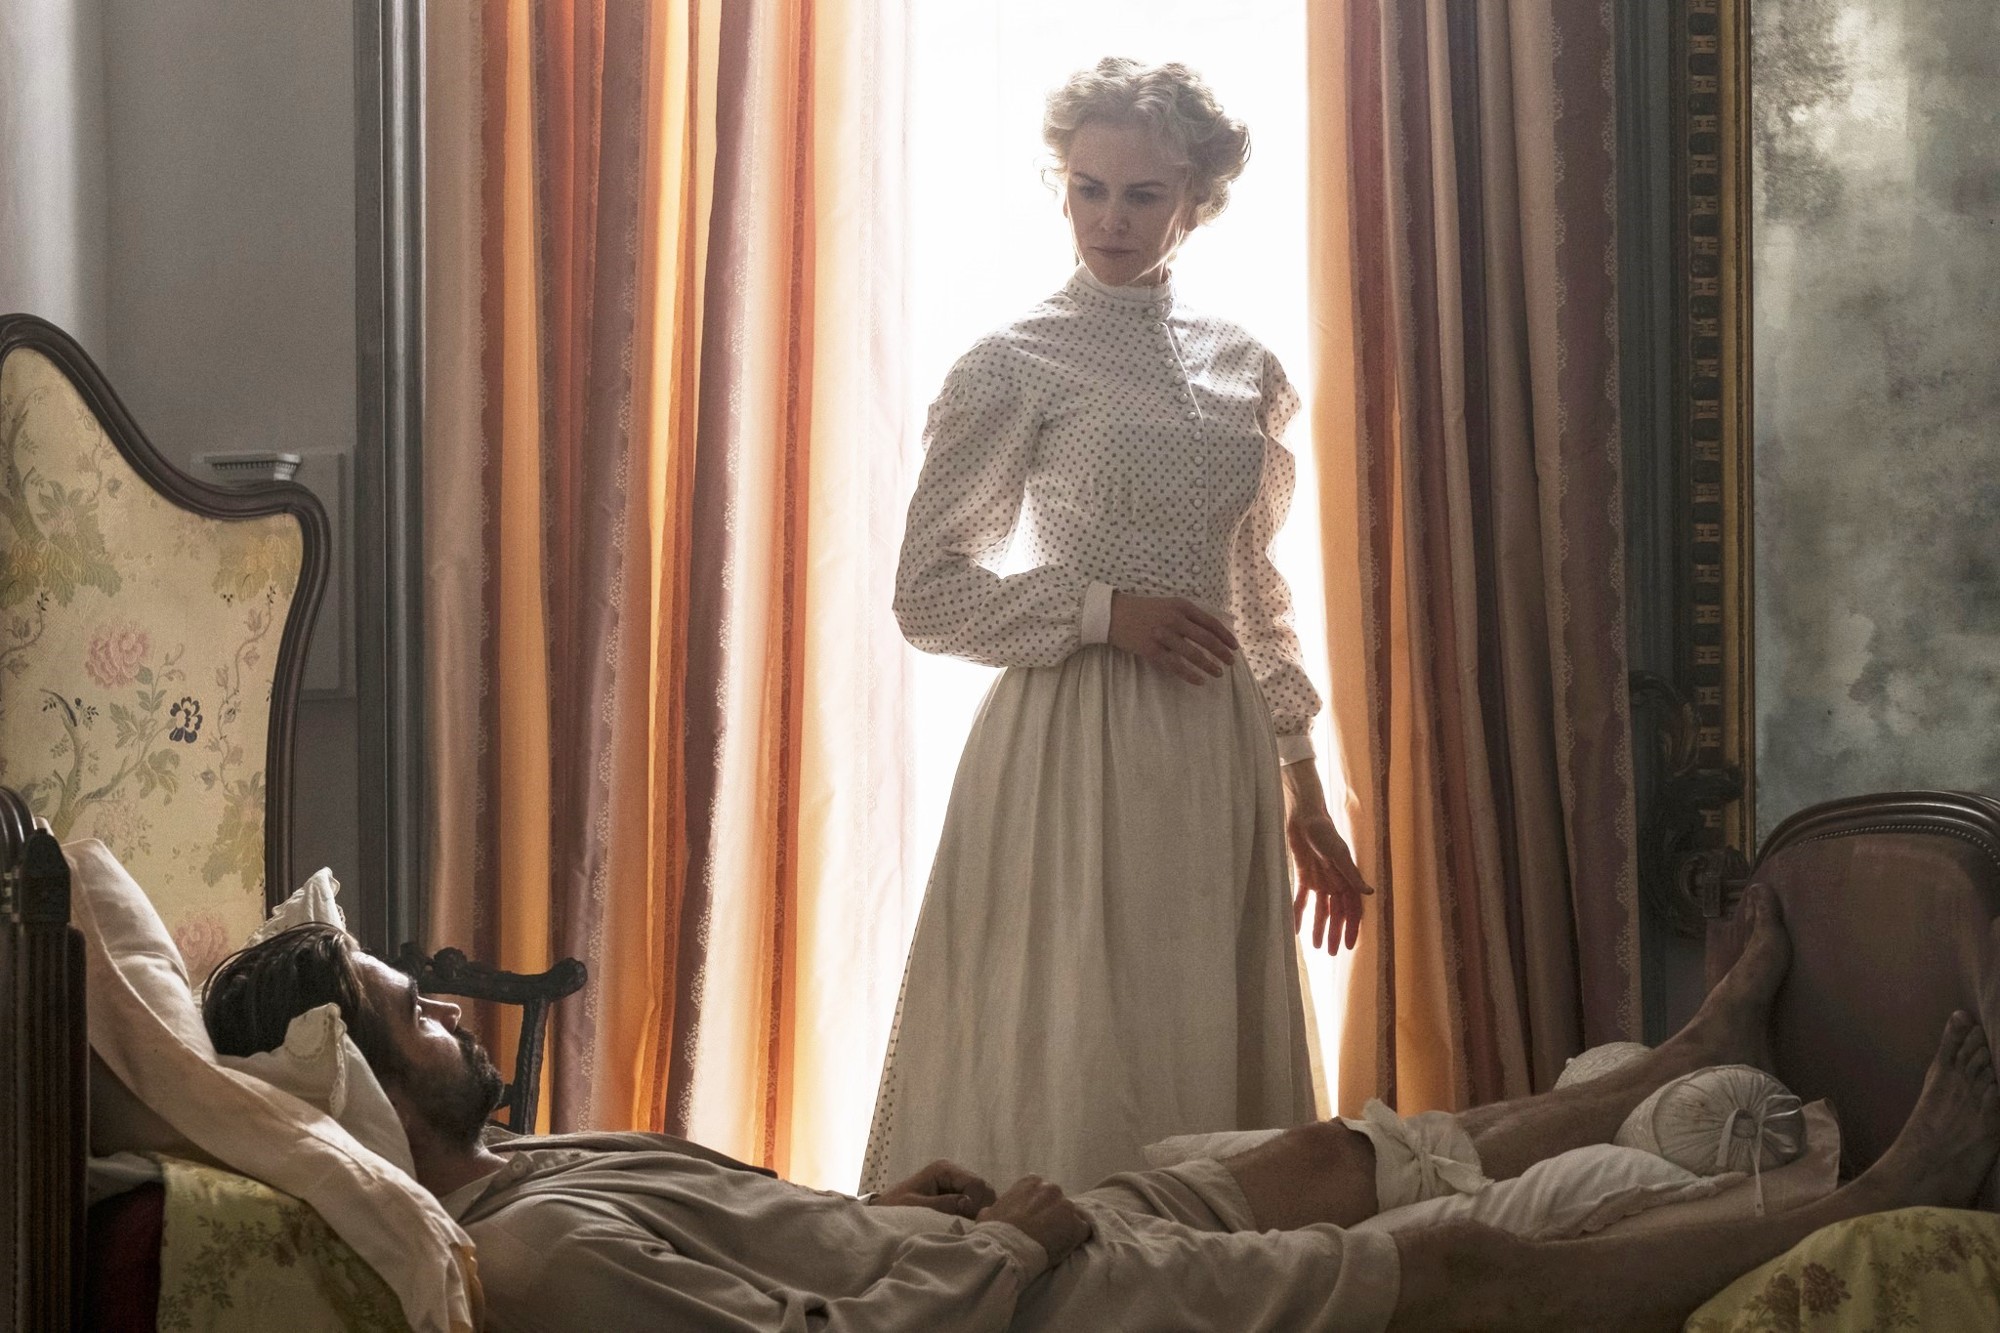 Colin Farrell stars as John McBurney and Nicole Kidman stars as Martha Farnsworth in Focus Features' The Beguiled (2017)